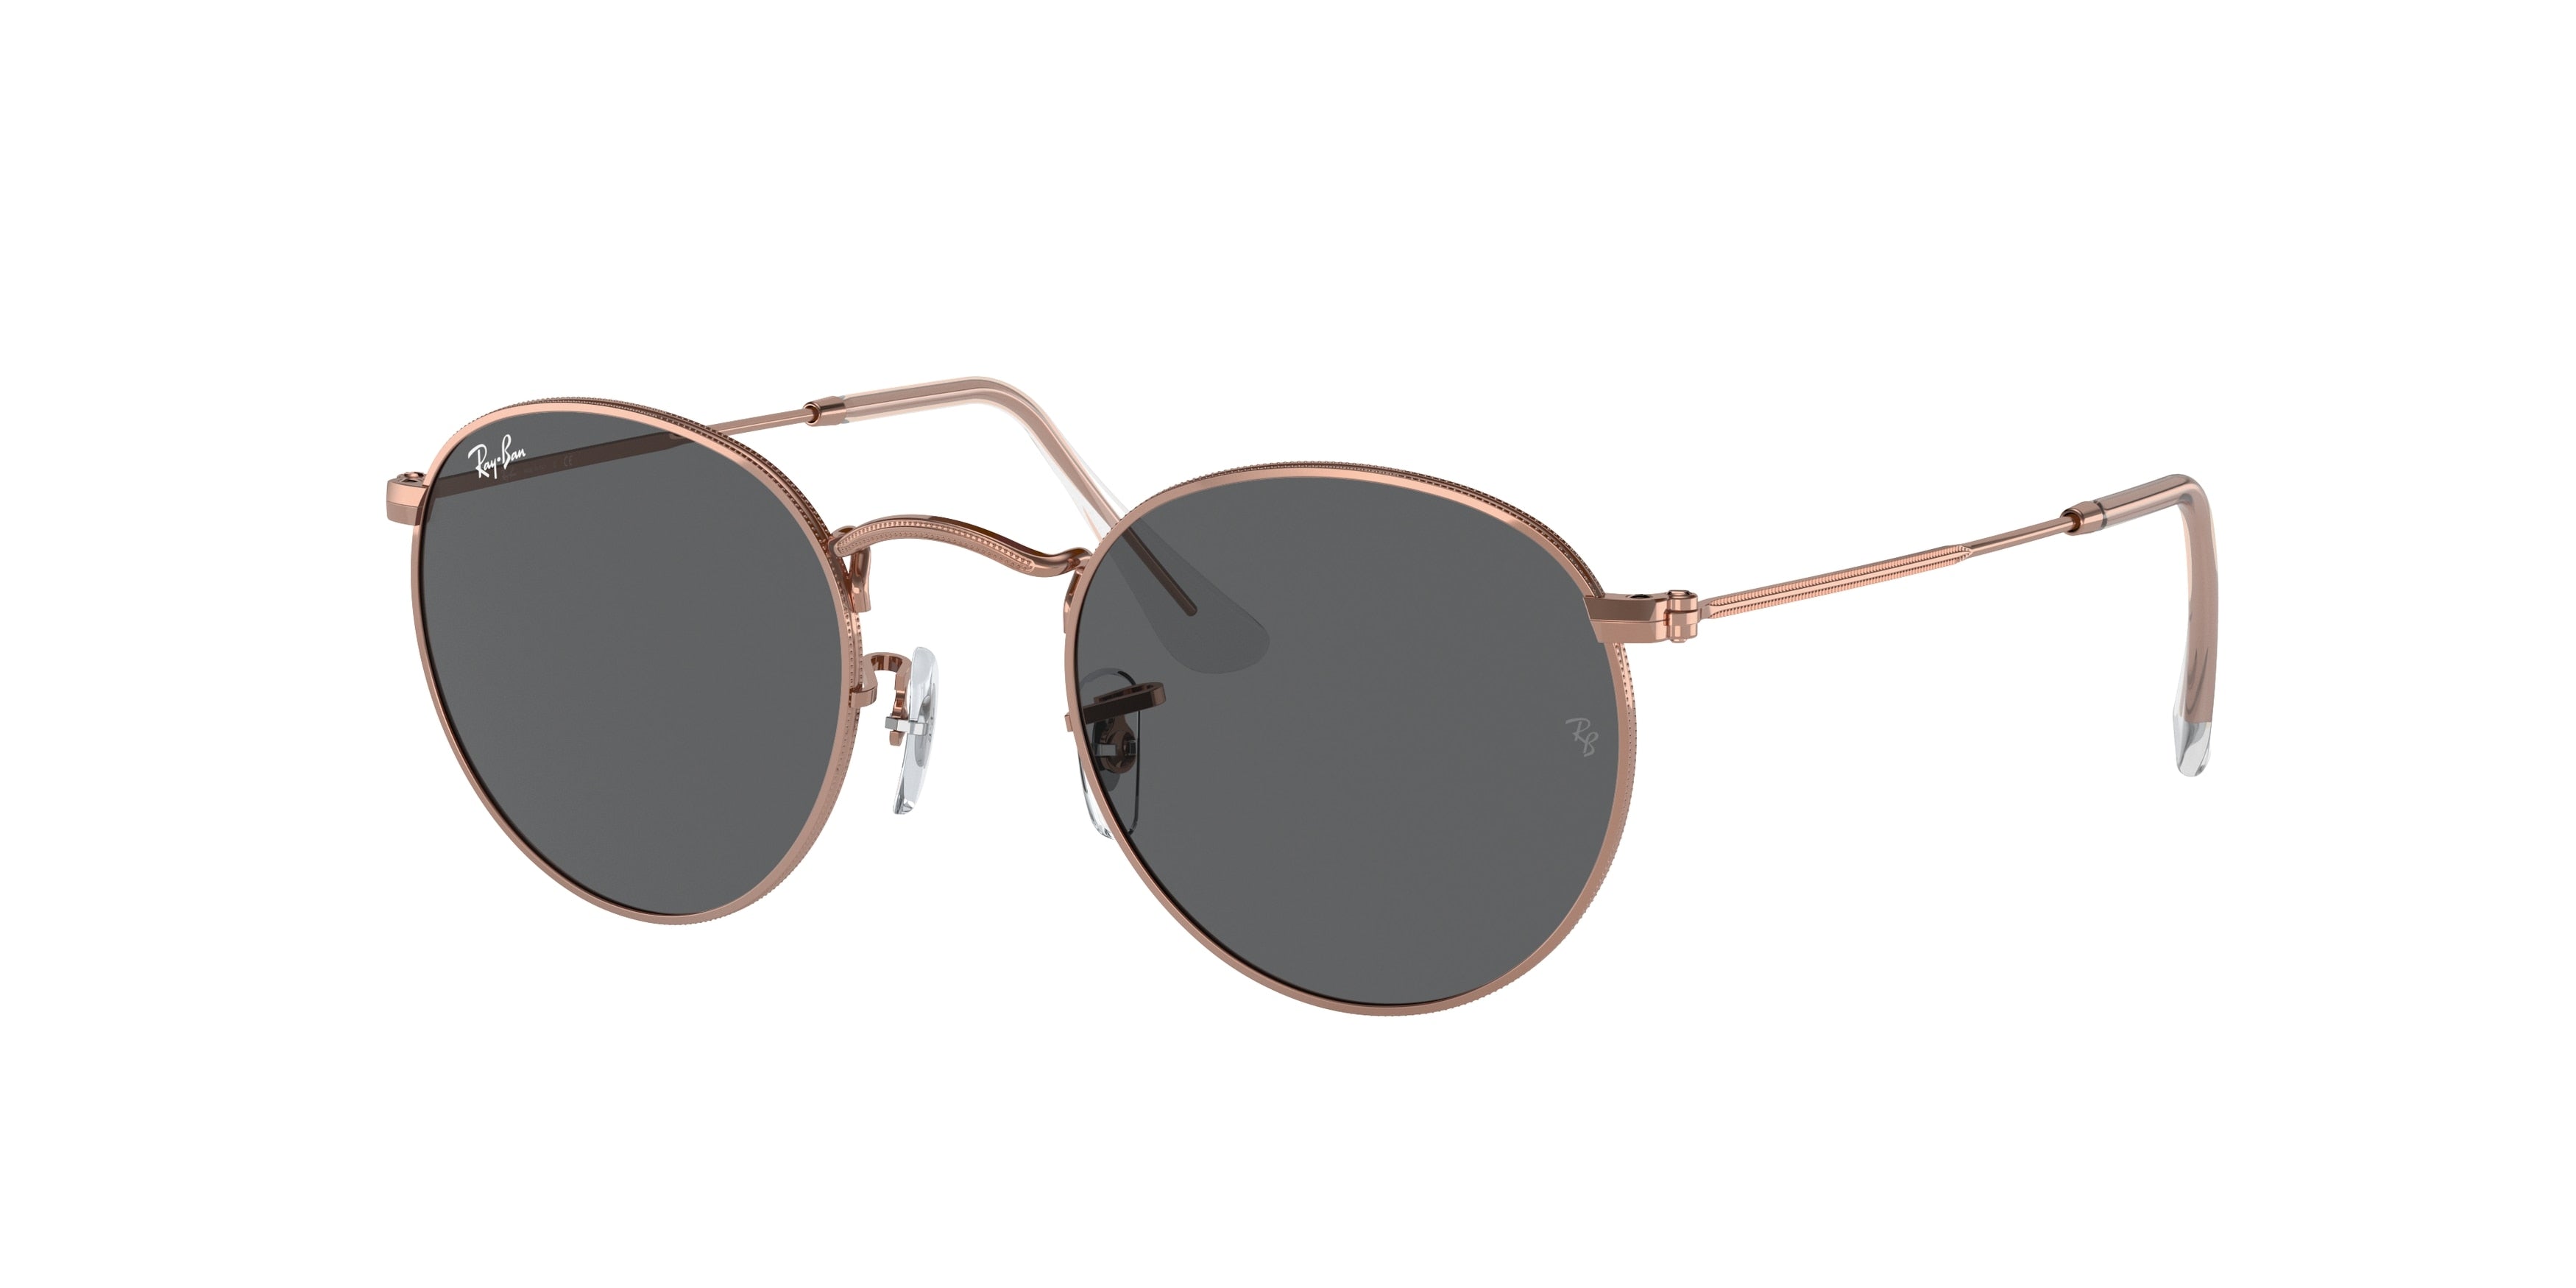 Ray-Ban ROUND METAL RB3447 Round Sunglasses  9202B1-Rose Gold 52-145-21 - Color Map Gold